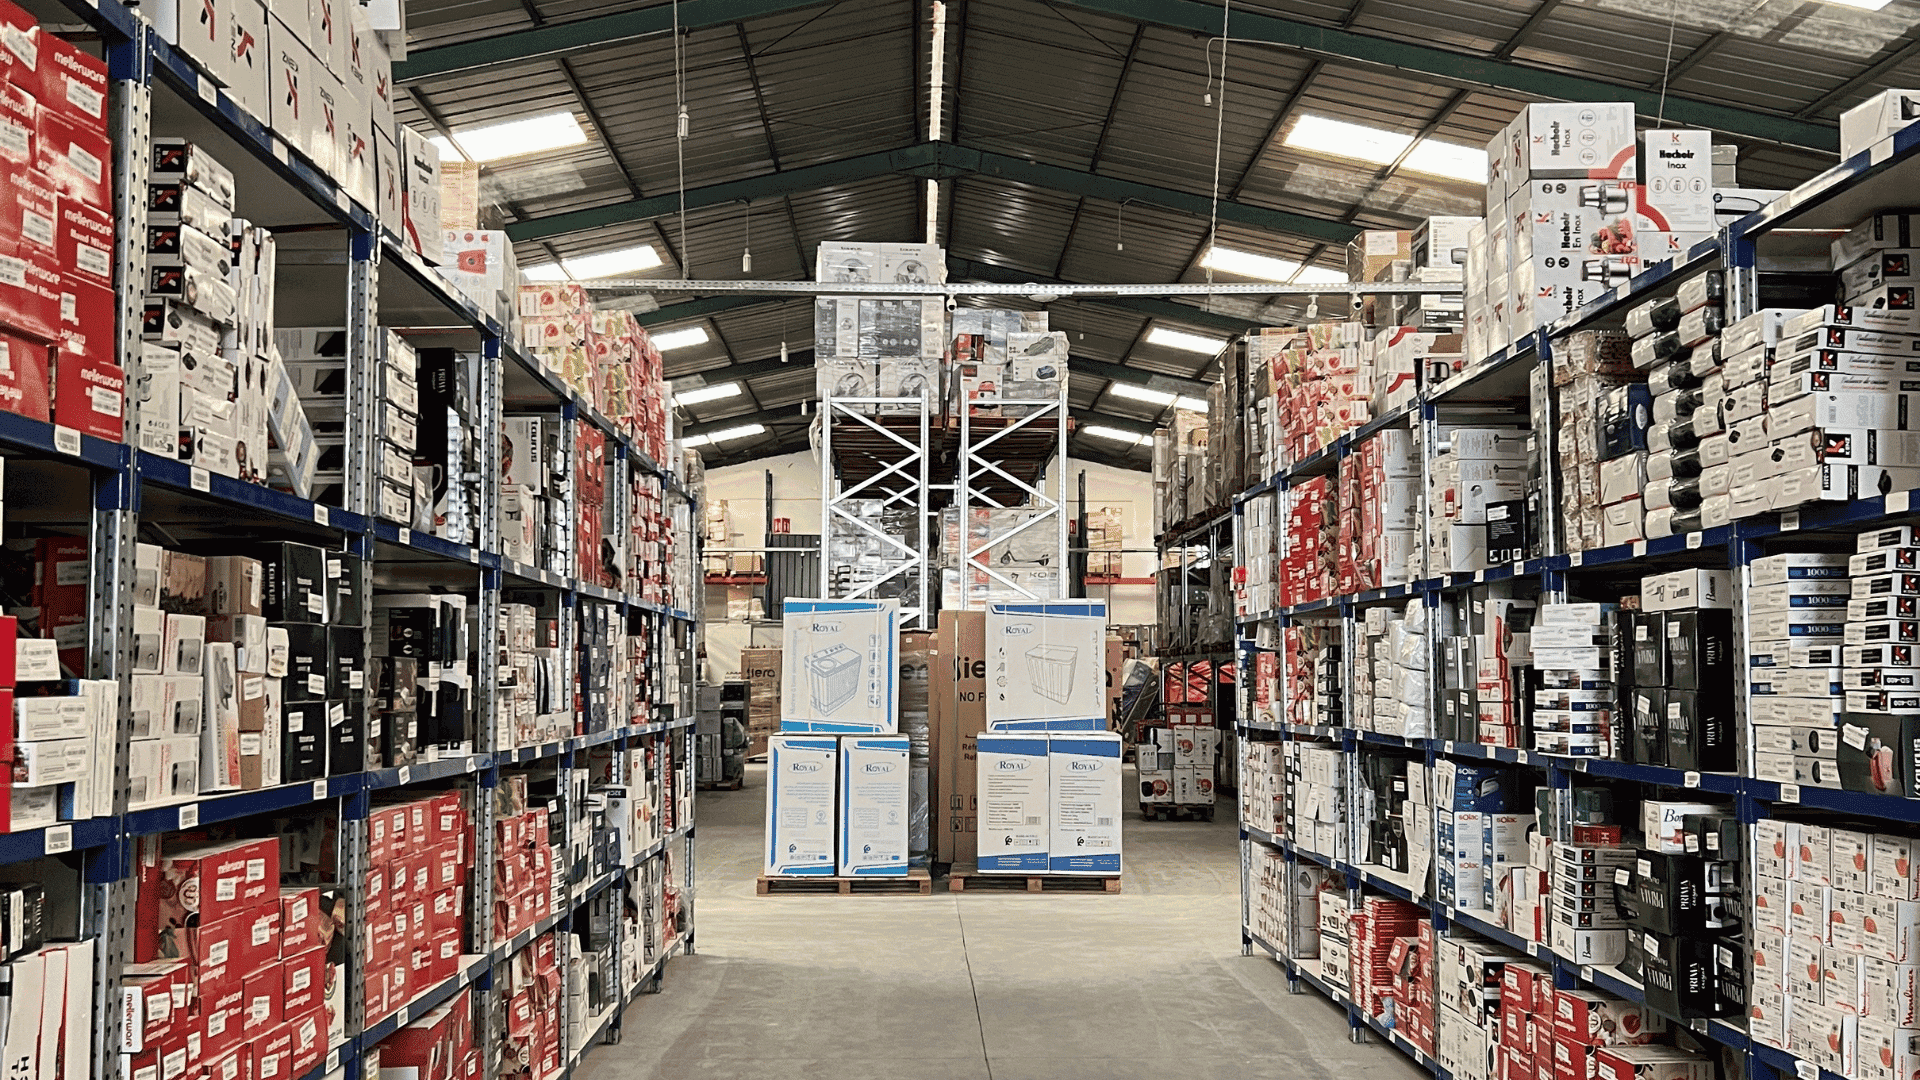 New warehouses consolidate operations, expand storage capacity to enhance supply chain management and support e-commerce growth